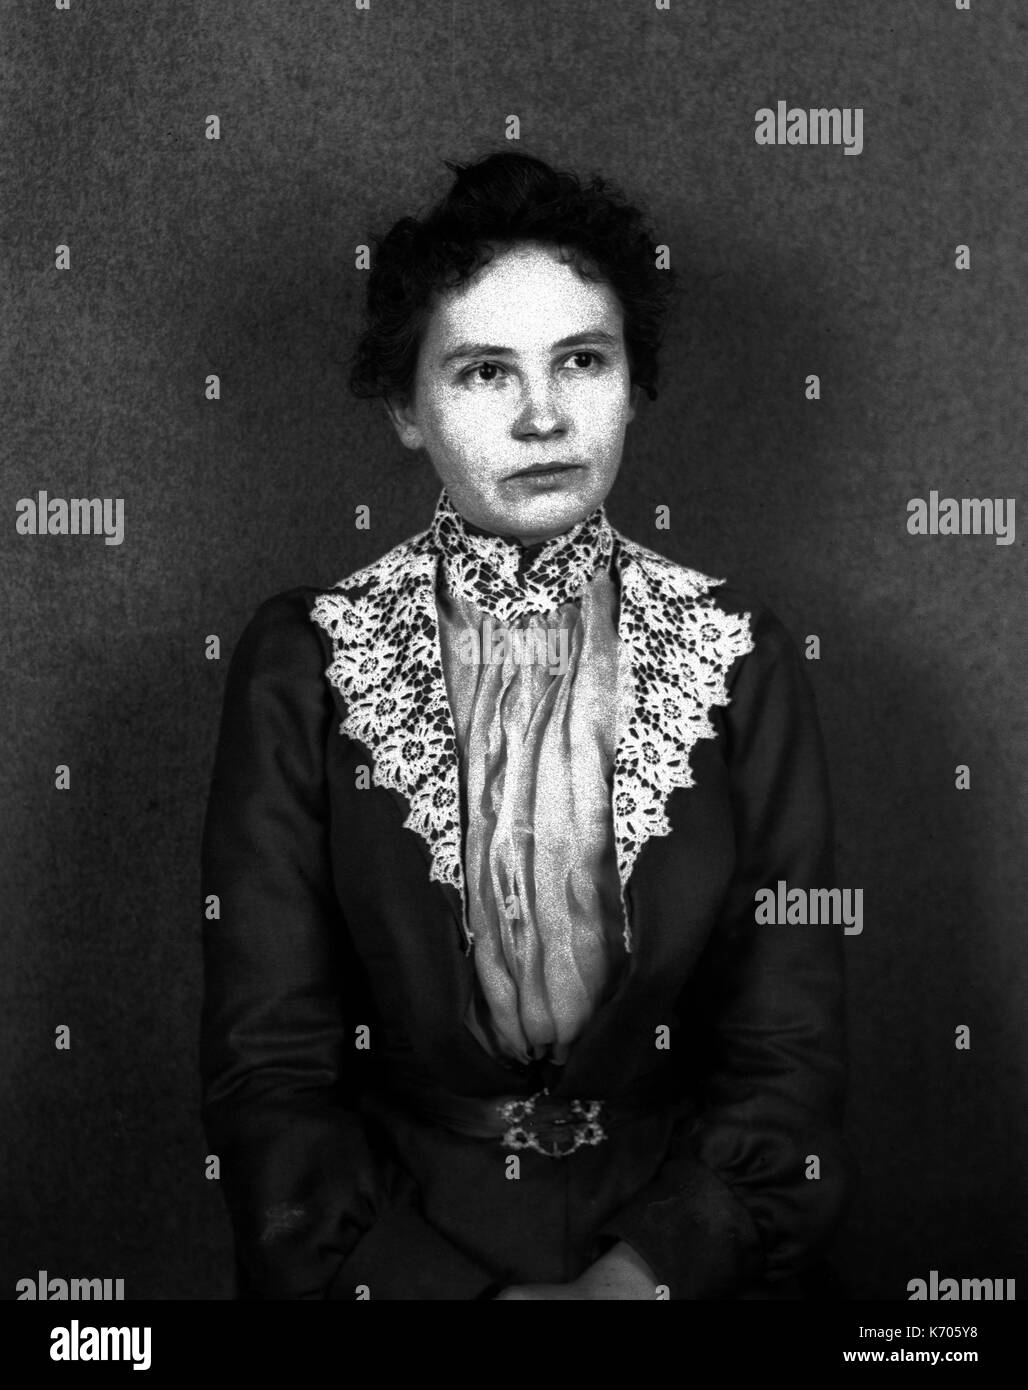 AJAXNETPHOTO. 1891-1910 (APPROX). FRANCE. - PORTRAIT OF A WOMAN SEATED  IN A LONG DRESS WITH A PATTERNED LACE COLLAR. PHOTOGRAPHER:UNKNOWN © DIGITAL IMAGE COPYRIGHT AJAX VINTAGE PICTURE LIBRARY SOURCE: AJAX VINTAGE PICTURE LIBRARY COLLECTION REF:AVL FRA 1890 B29X1221 Stock Photo